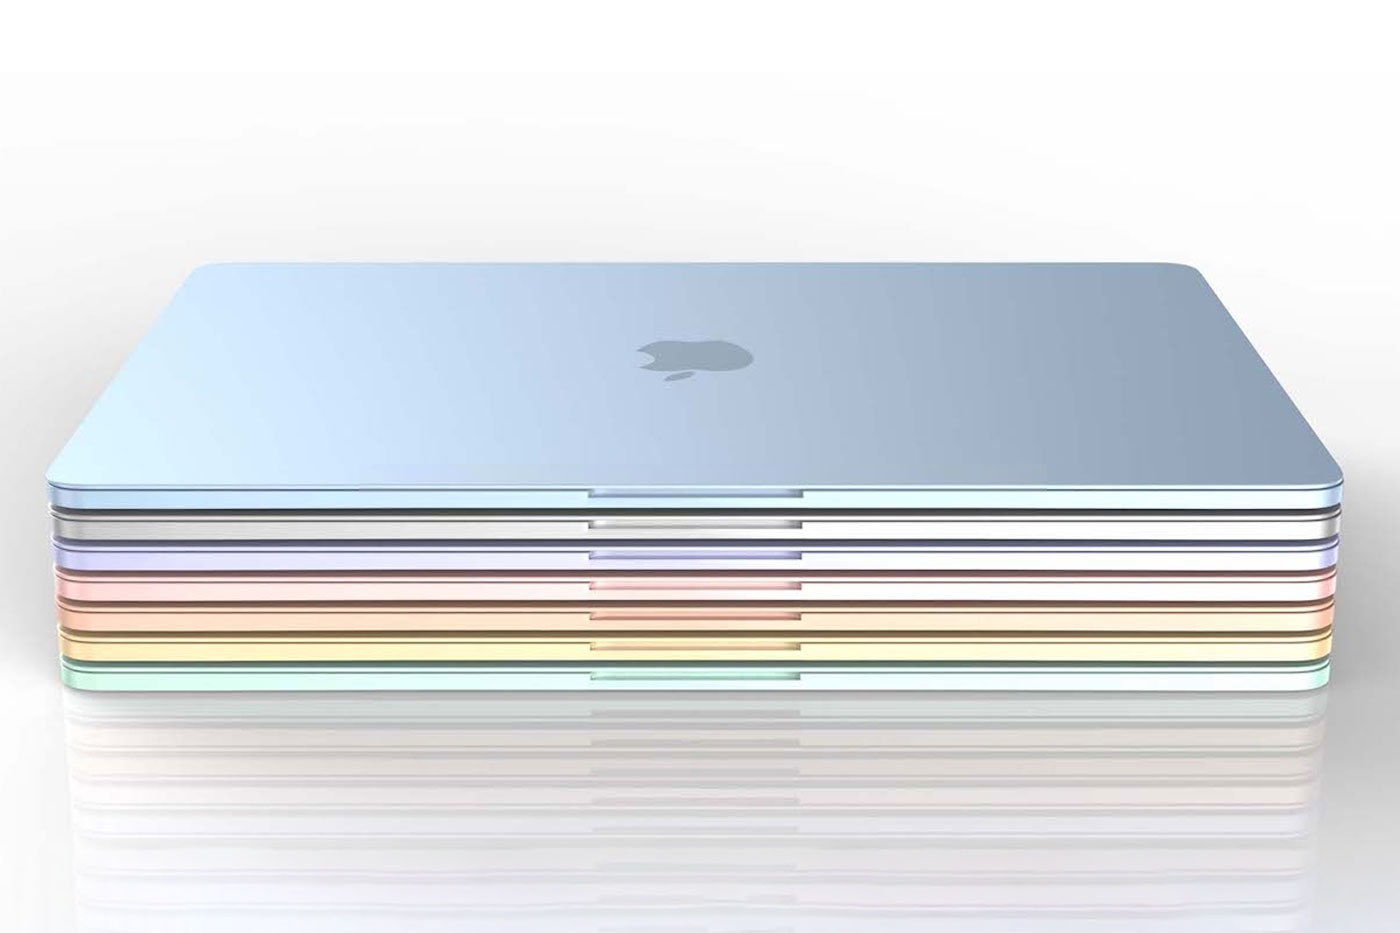 New 2022 Apple Macbook Air Rumored to Feature Revamped Design and More Color Options mac studio ming-chi kuo thinner lighter